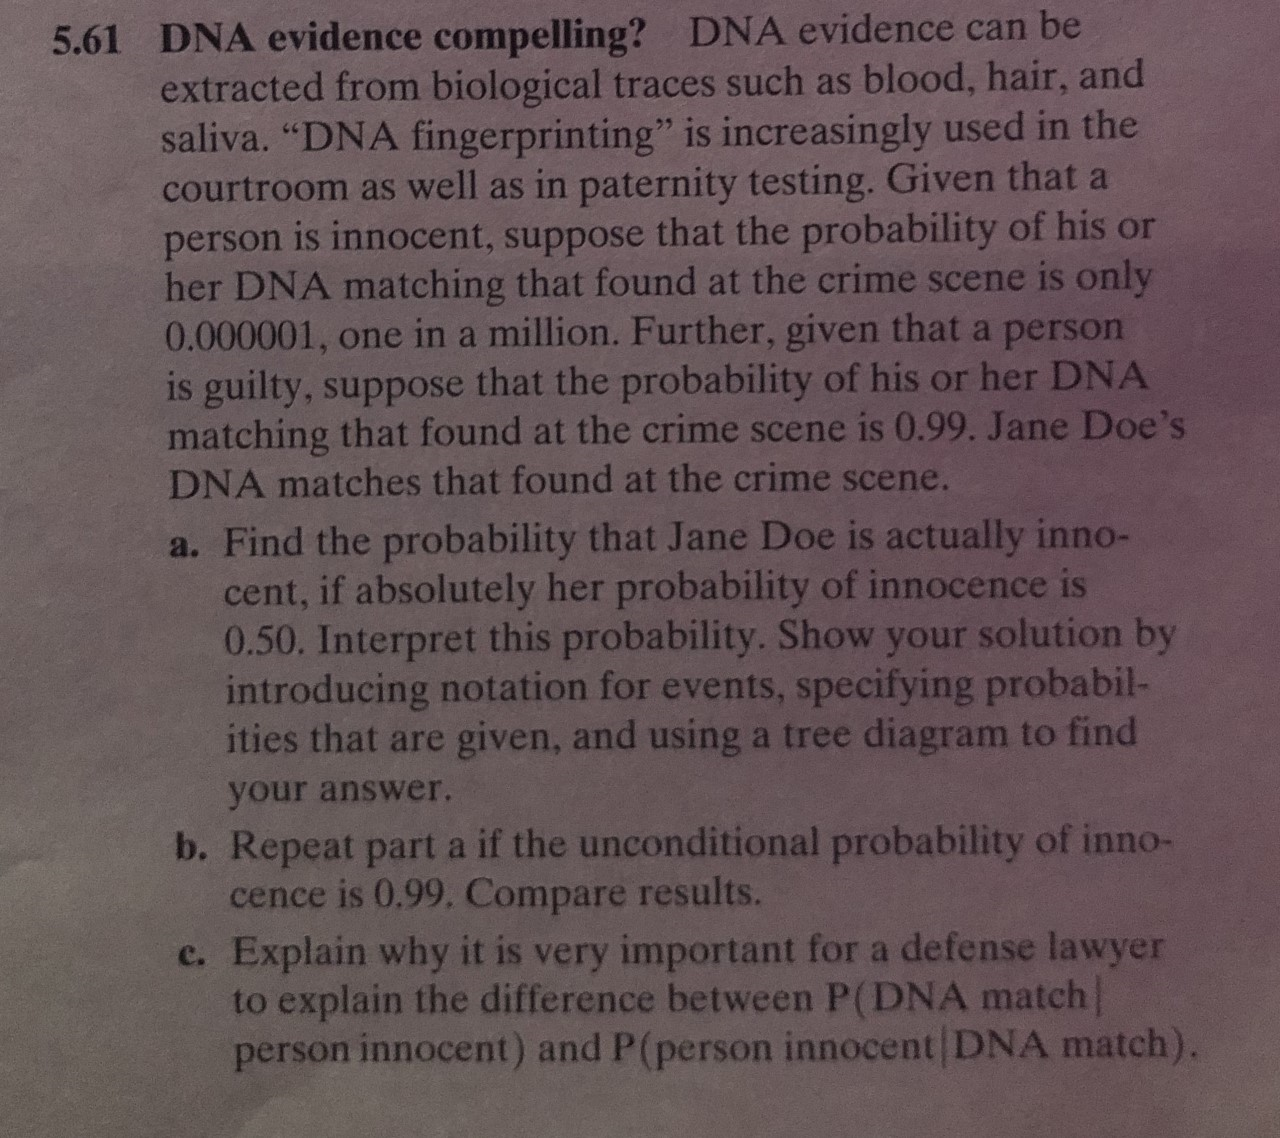 DNA evidence compelling? DNA evidence can be
extracted from biological traces such as blood, hair, and
saliva. "DNA fingerprinting" is increasingly used in the
courtroom as well as in paternity testing. Given that a
person is innocent, suppose that the probability of his or
her DNA matching that found at the crime scene is only
0.000001, one in a million. Further, given that a person
is guilty, suppose that the probability of his or her DNA
matching that found at the crime scene is 0.99. Jane Doe's
DNA matches that found at the crime scene.
5.61
a. Find the probability that Jane Doe is actually inno-
cent, if absolutely her probability of innocence is
0.50. Interpret this probability. Show your solution by
introducing notation for events, specifying probabil-
ities that are given, and using a tree diagram to find
your answer.
b. Repeat part a if the unconditional probability of inno-
cence is 0.99. Compare results.
Explain why it is very important for a defense lawyer
to explain the difference between P(DNA match
person innocent) and P(person innocent DNA match).
с.
